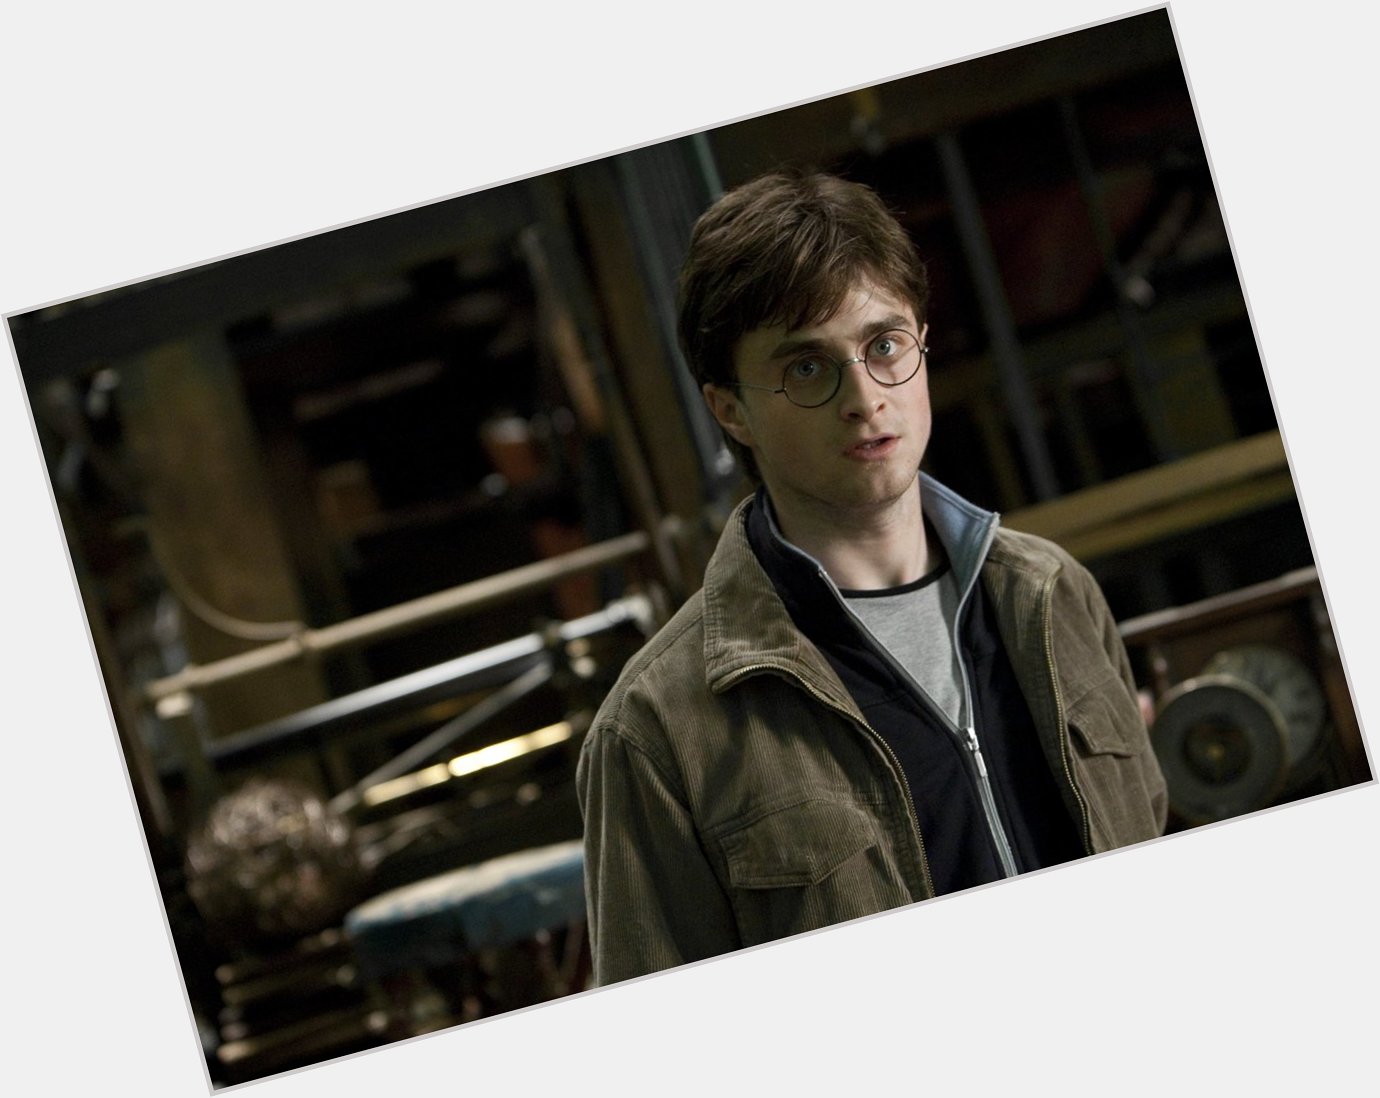 Happy birthday to Daniel Radcliffe. 

Seen here as Harry Potter in and the Deathly Hallows Part 2. 